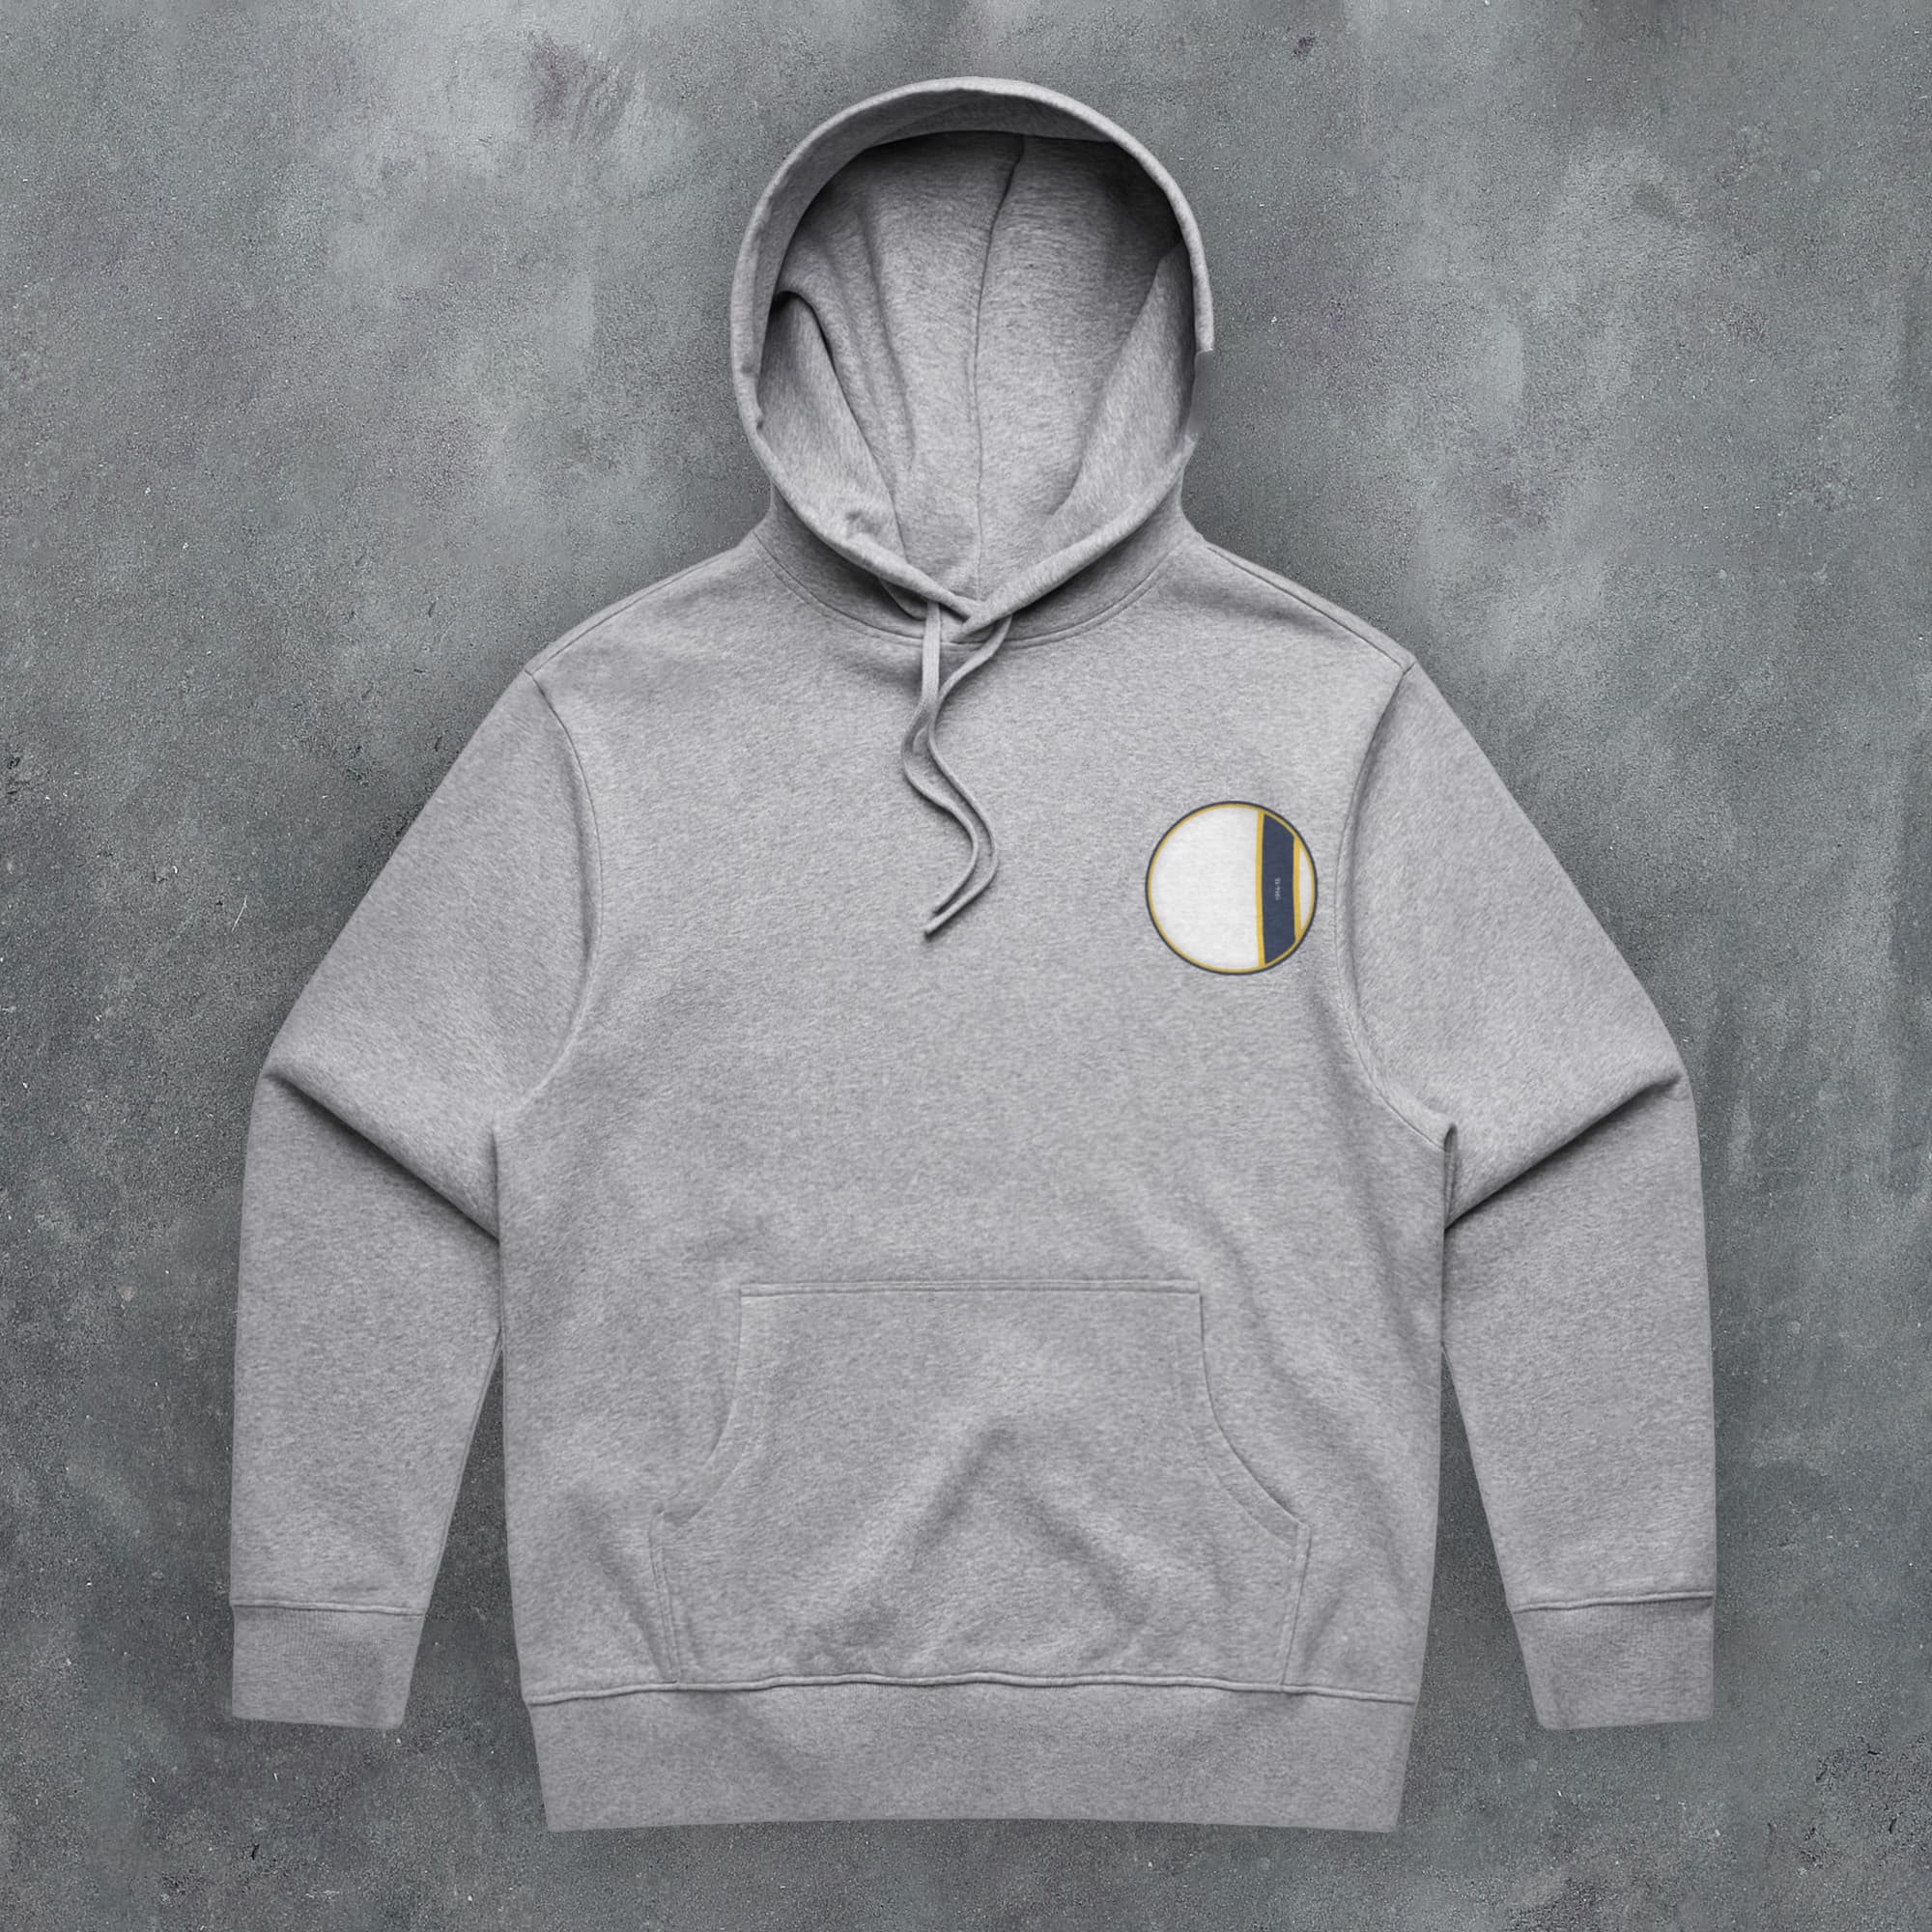 a grey hoodie with a white and yellow patch on it